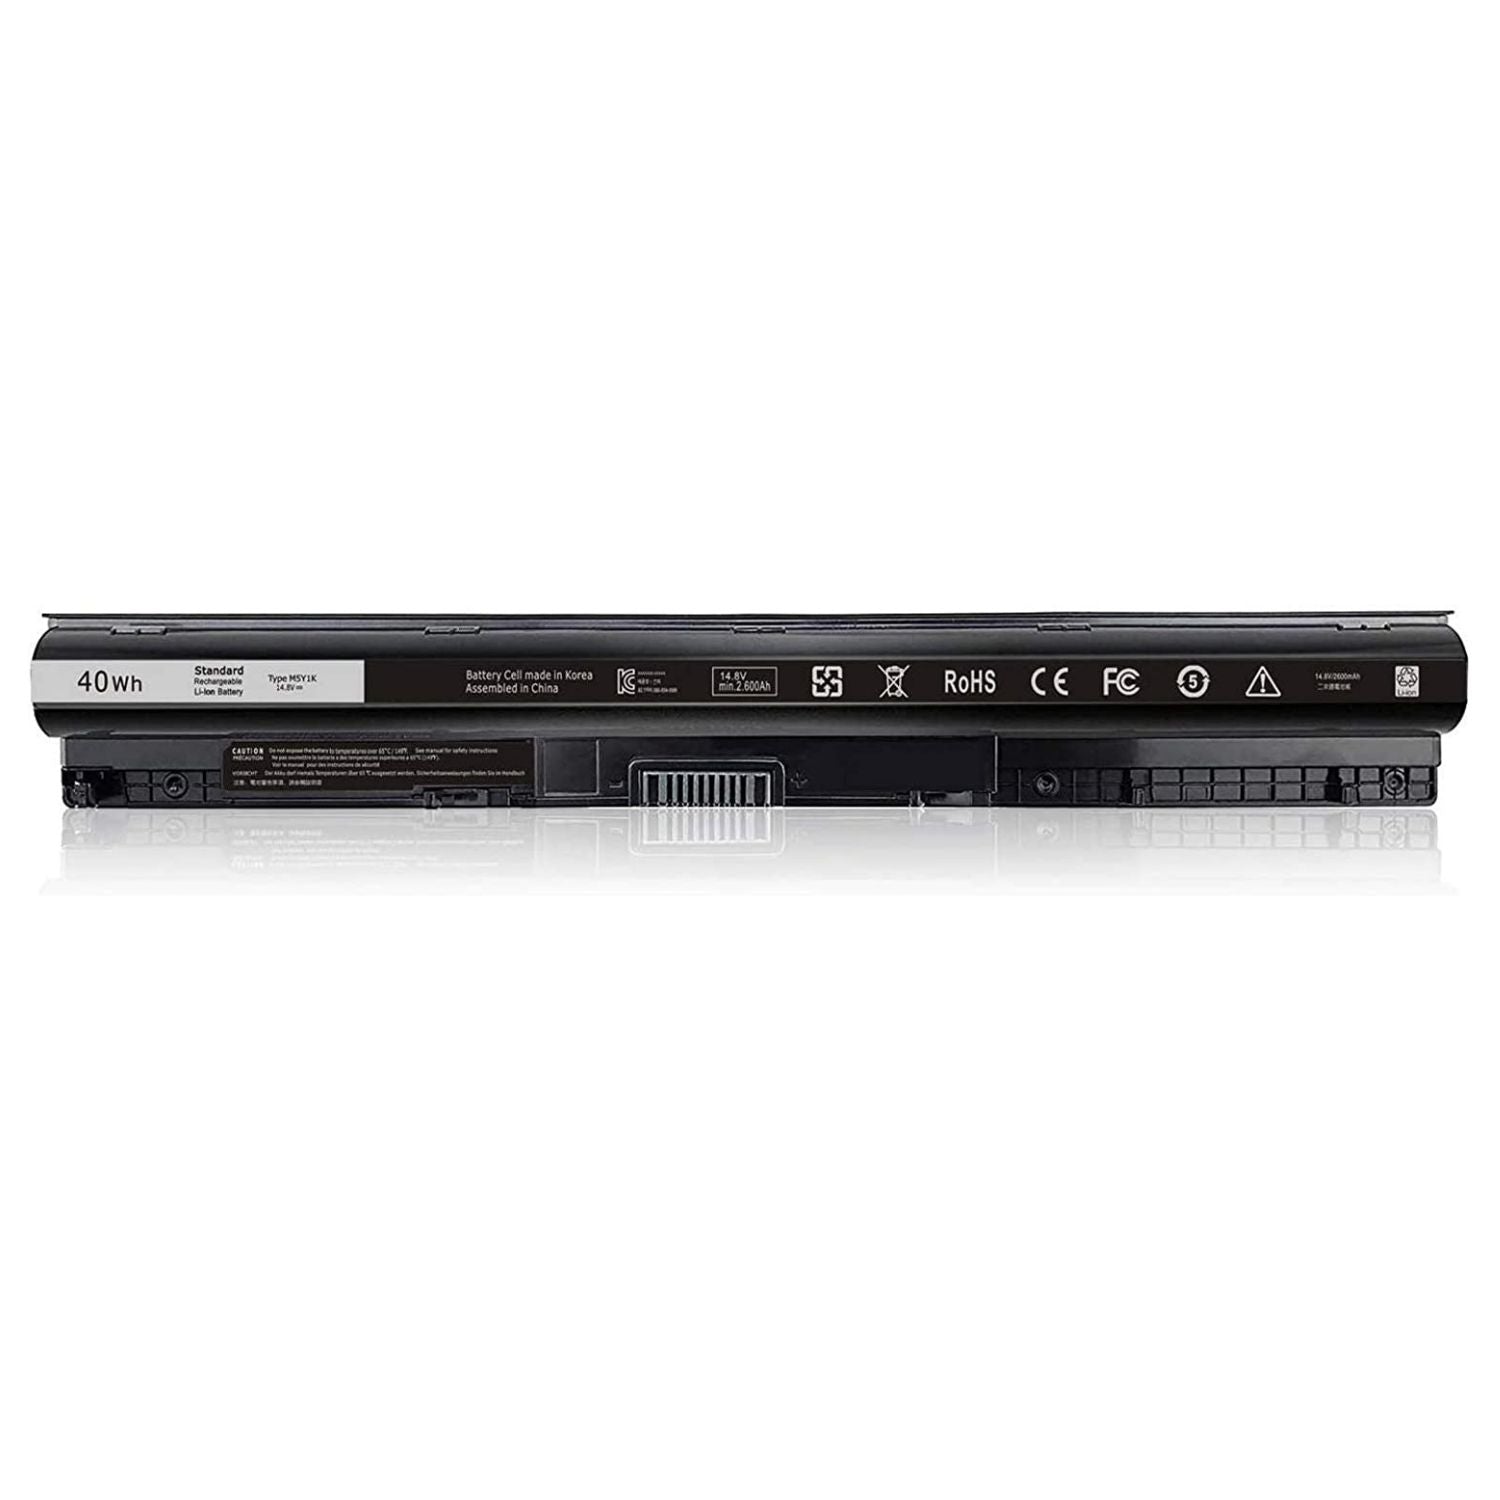 Dell 40WH M5Y1K Battery for Inspiron & vostro 14 15 17 5000 3000 Series 5559 5558 3558 5759 5759 5755 5566 5758 3567 5555 5551 3552 3451 3452 5458 1KFH3 P47F 5545 VN3N0 6YFVW GXVJ3 P51F P63F HD4J0 78V9D 453-BBBQ Series Laptop's.